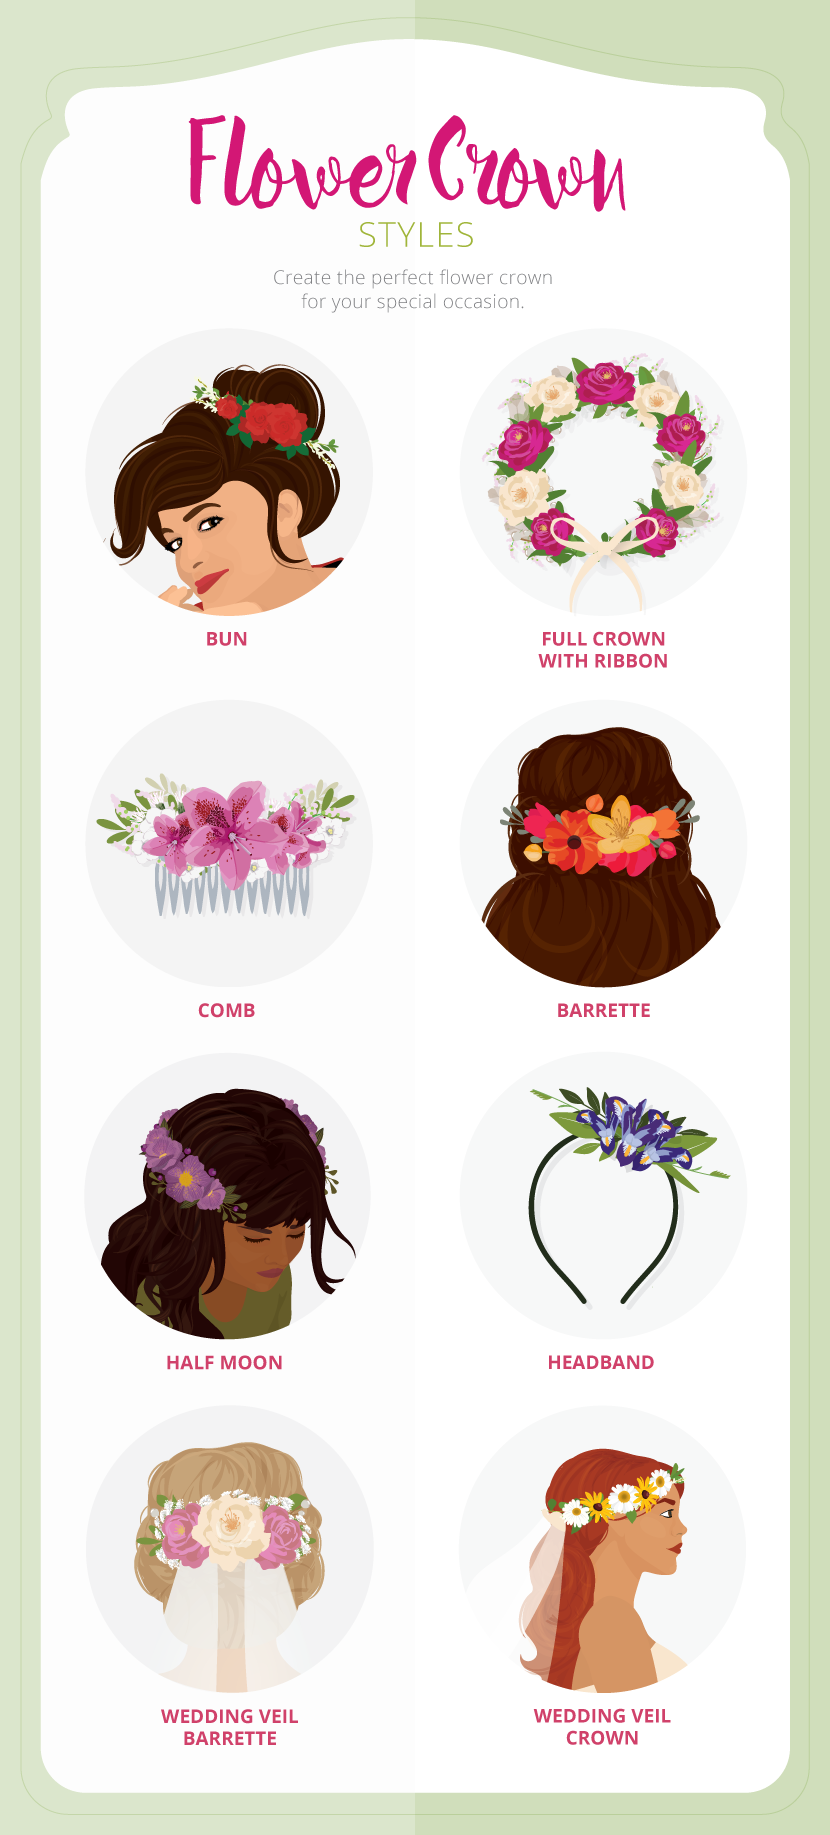 Flower Crown Styles - Making Flower Crowns with Real Flowers